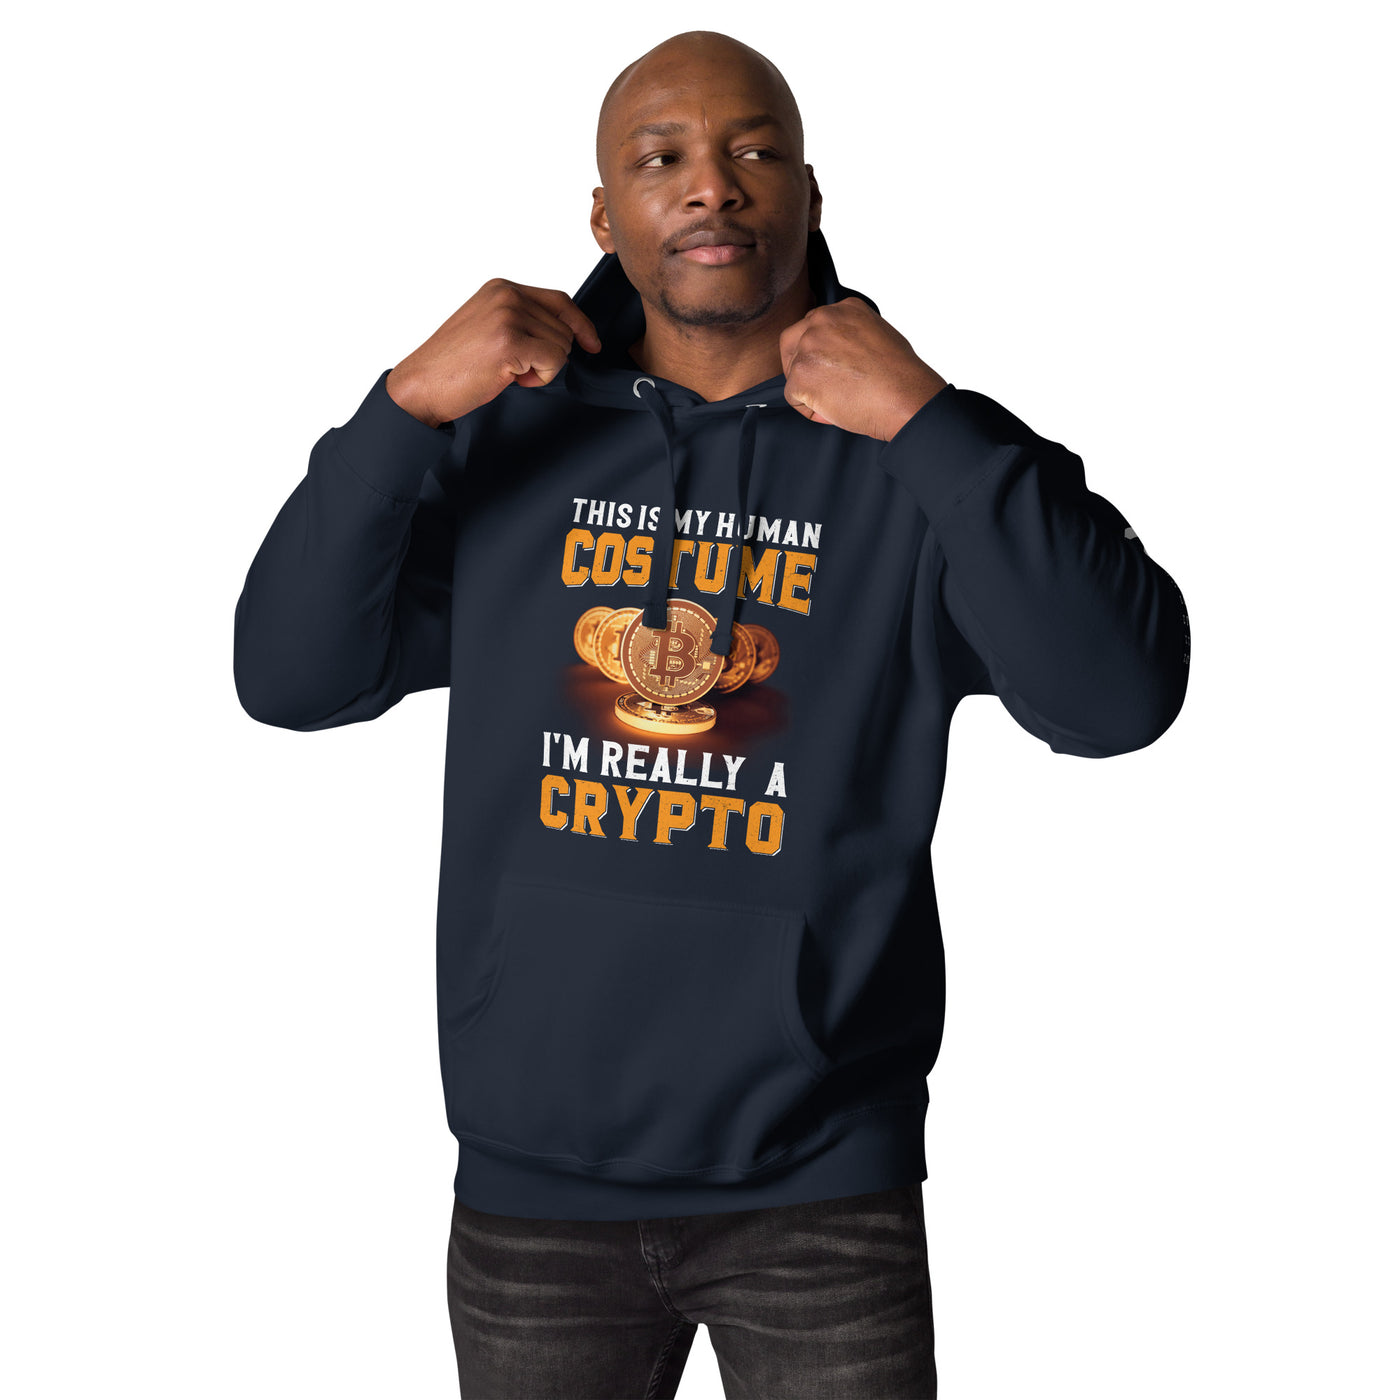 This is my Human Costume, I am a really a Crypto - Unisex Hoodie